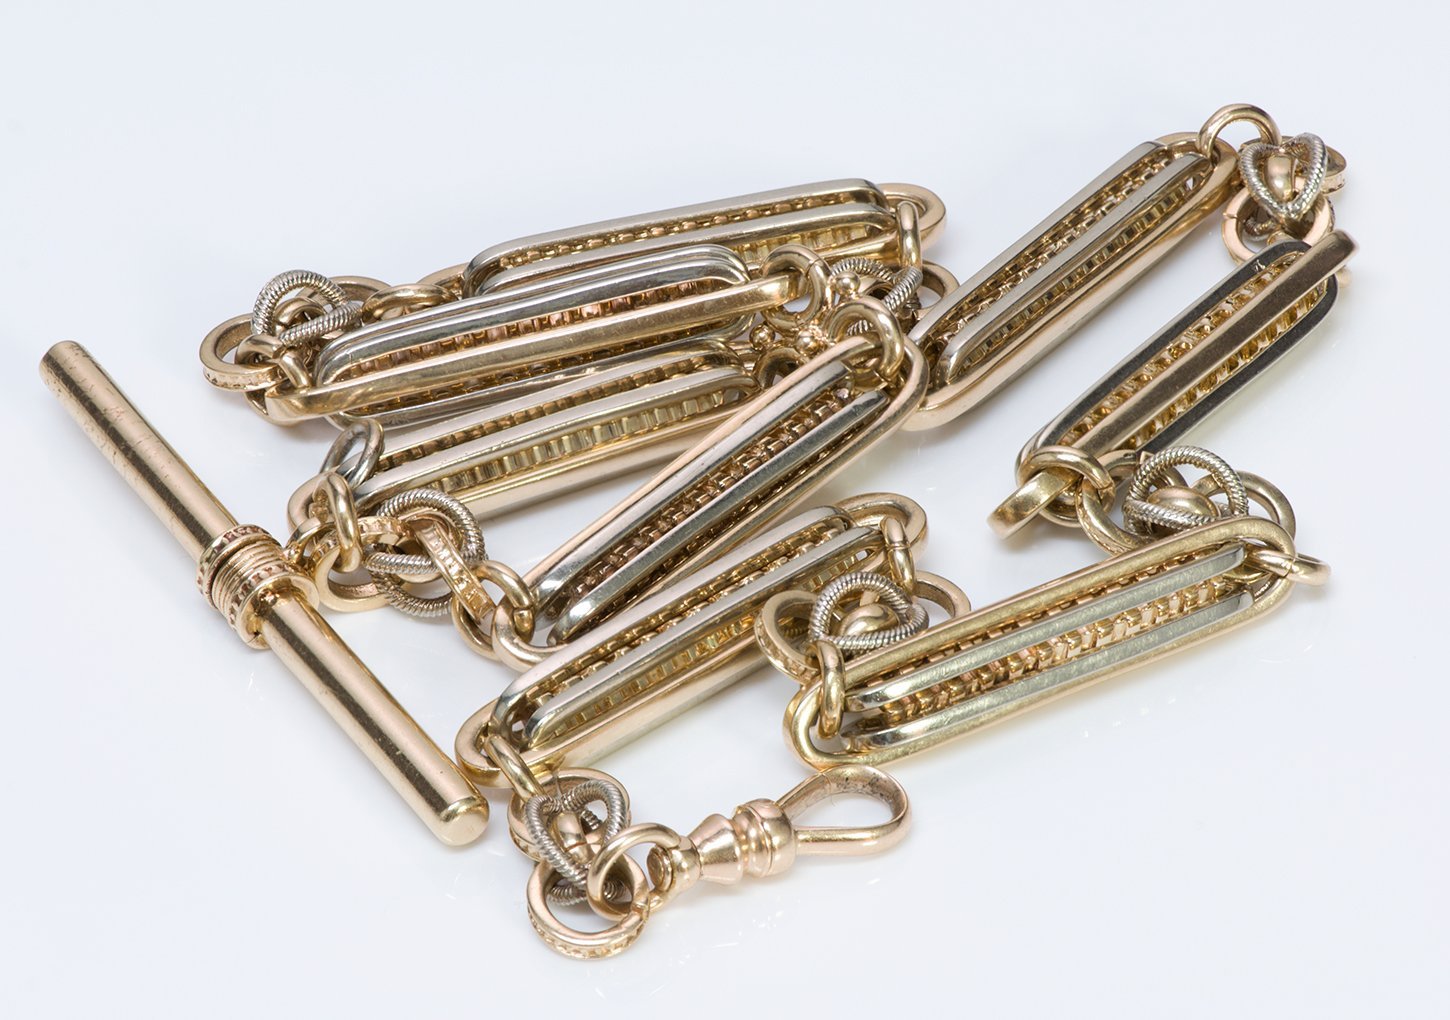 Antique Two Tone Gold Watch Fob Chain